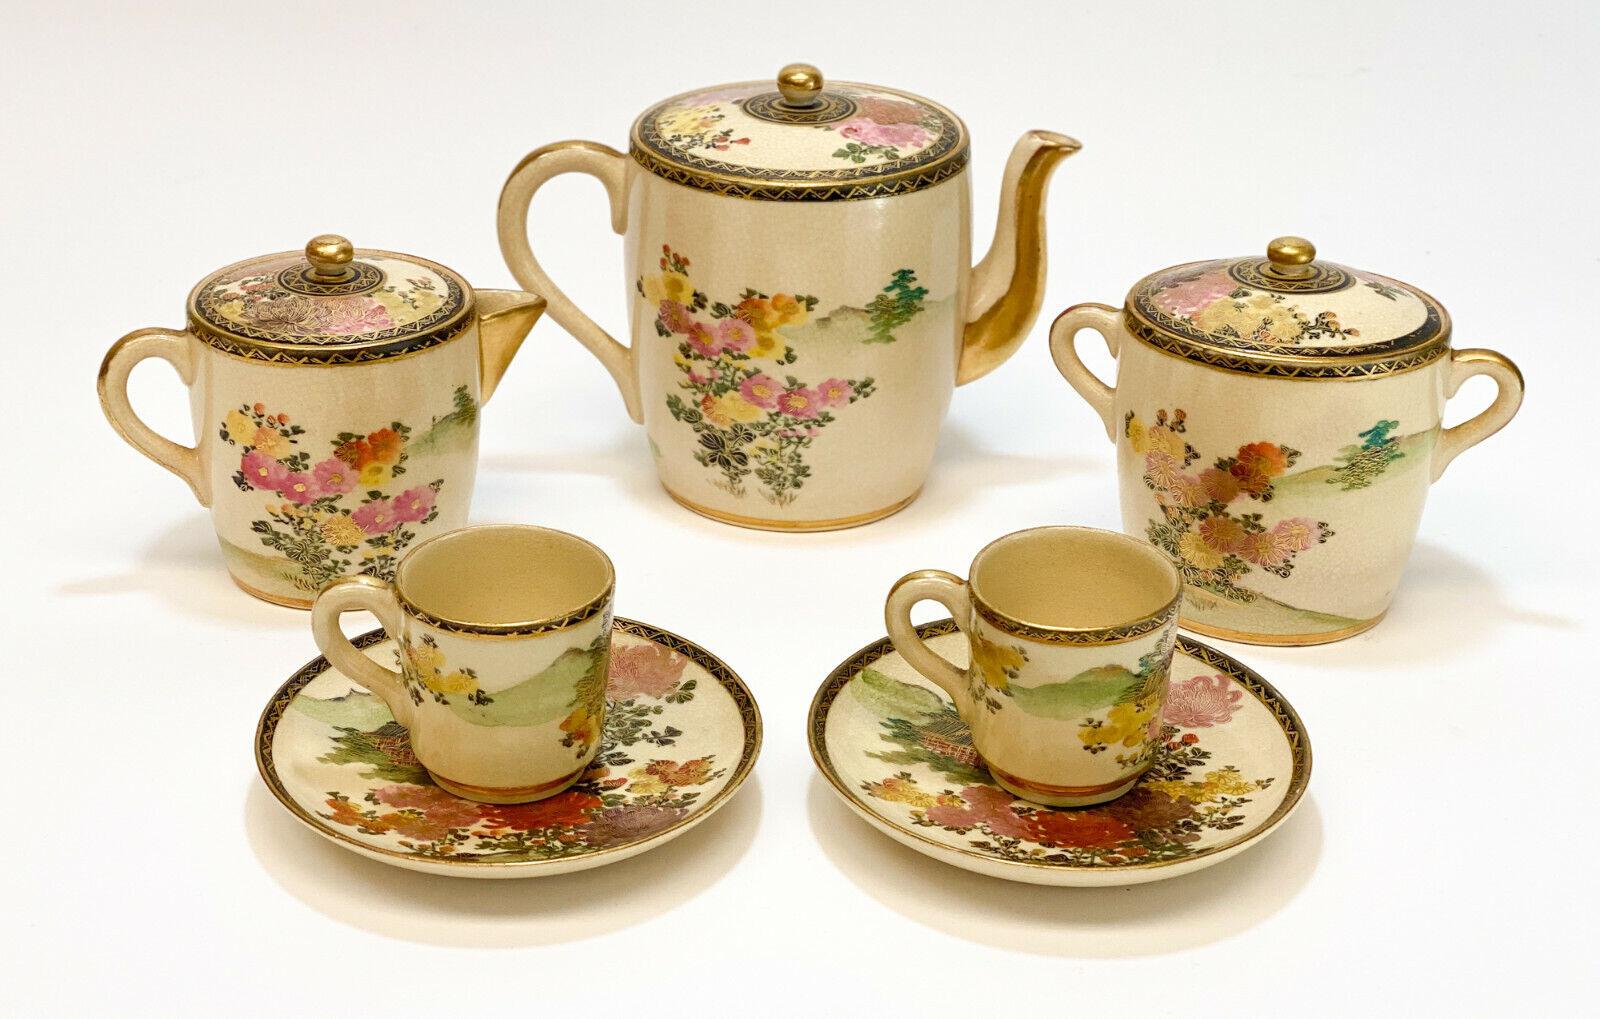 Japanese Porcelain Satsuma Hand painted tea service for 2, Early 20th Cent.

Beautiful hand painted floral and landscape scenes throughout with gilt accents. Japanese mark to the underside.

Additional Information:
Dimension: Teapot: 6.5 inches